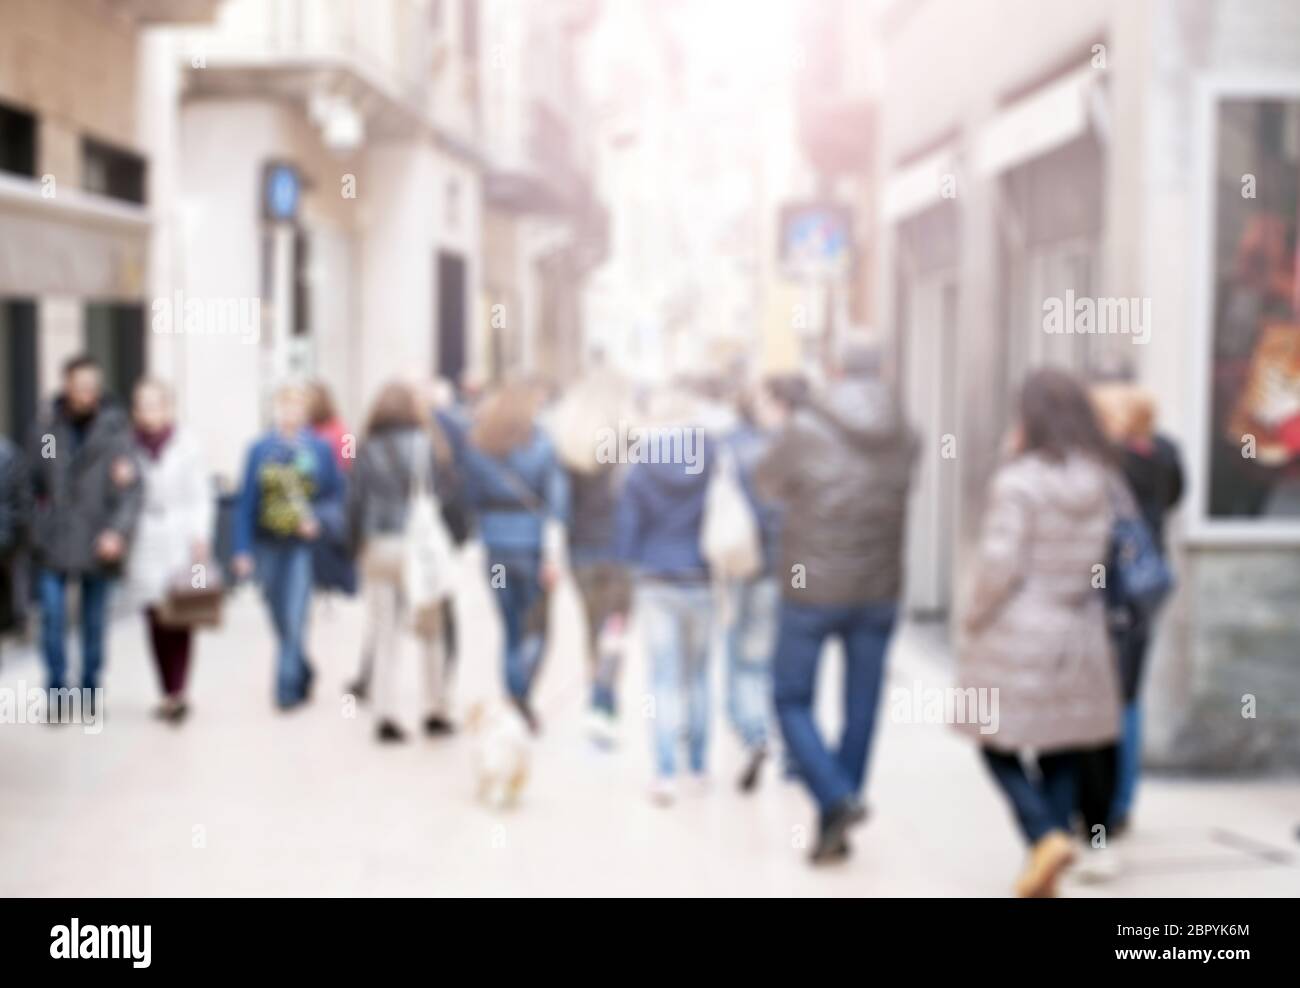 People walking at city centre, blurred, defocused picture. Pedestrians in Italian street in Verona, Italy. Stock Photo